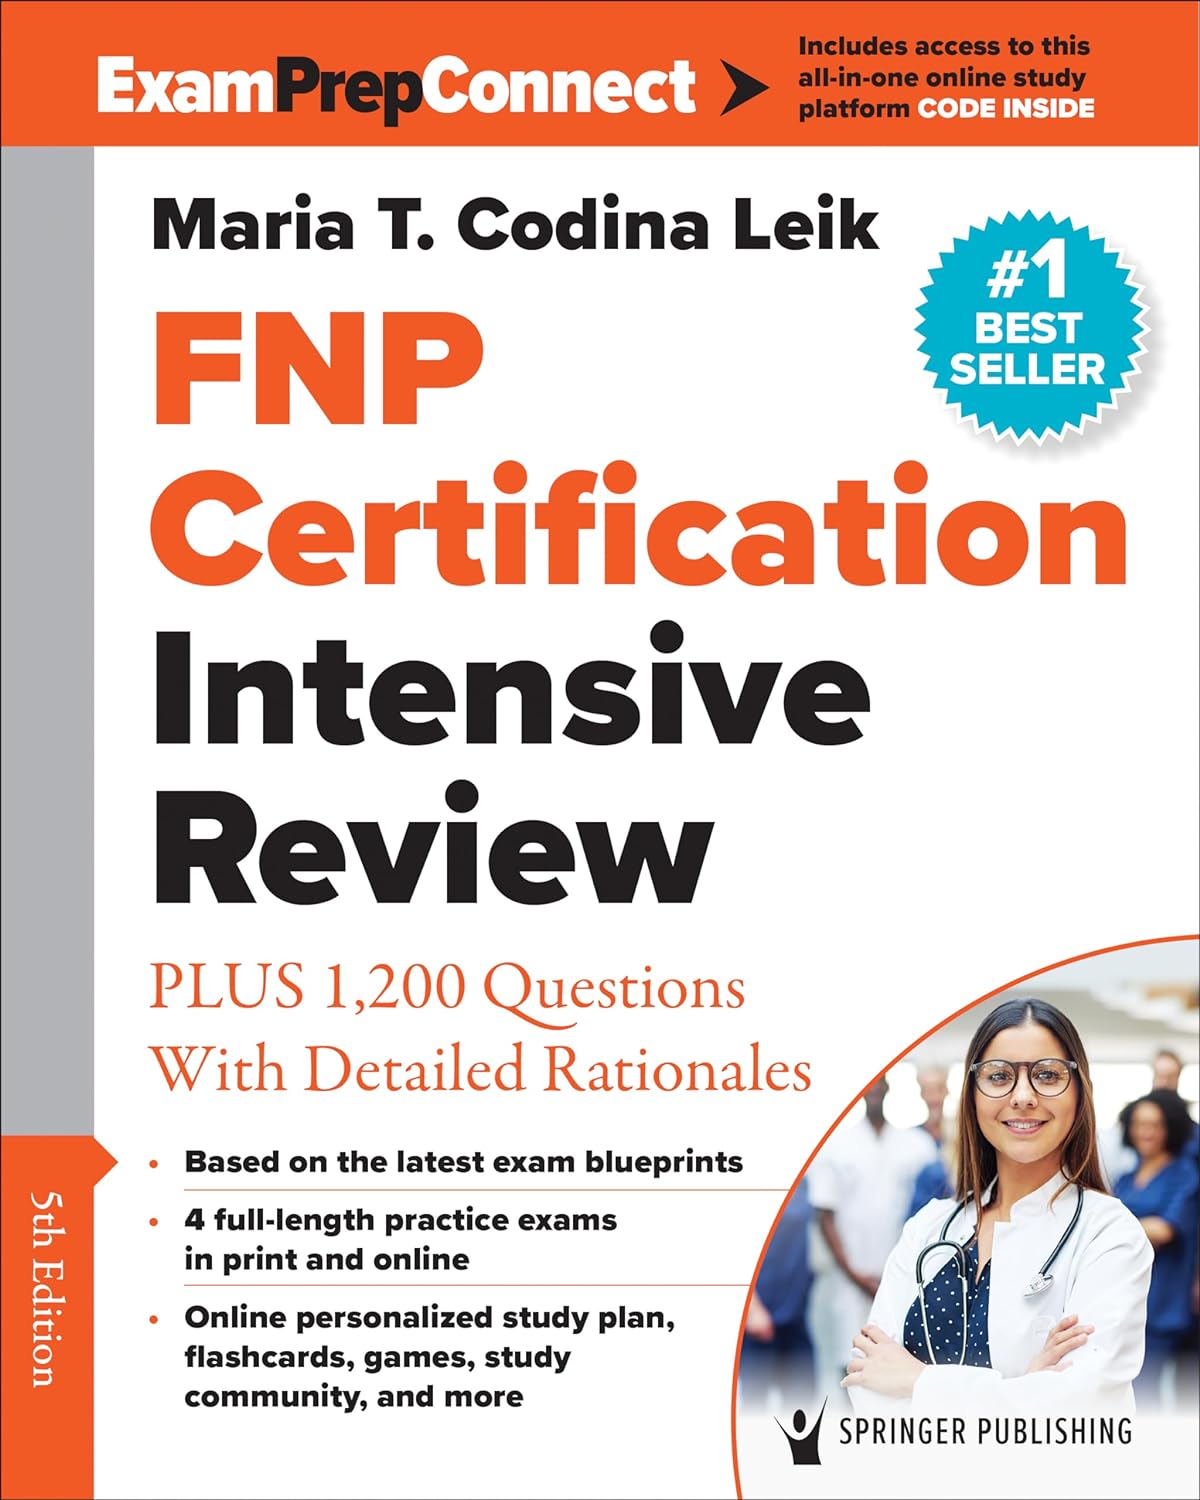 FNP Certification Intensive Review PLUS 1,200 Questions With Detailed Rationales 5th Edition